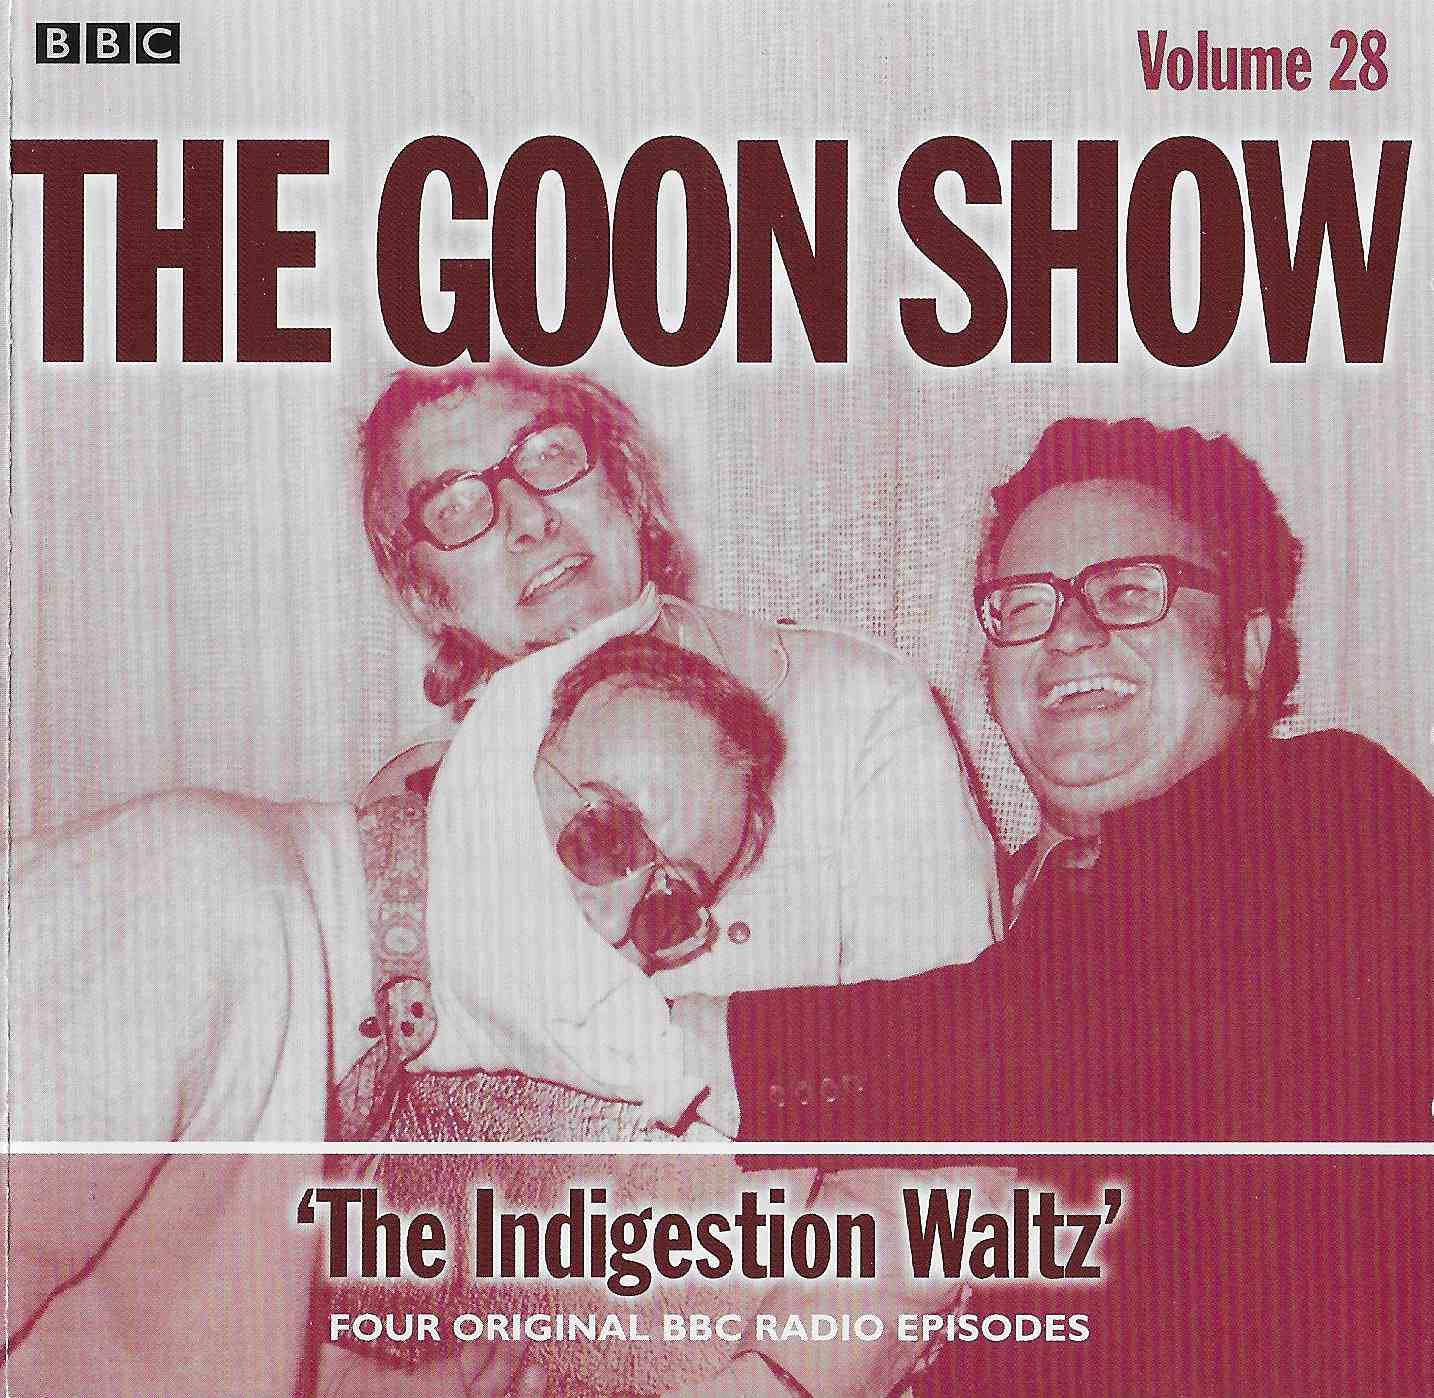 Picture of The Goon Show 28 - The indigestion waltz by artist Spike Milligan / Larry Stephens from the BBC cds - Records and Tapes library